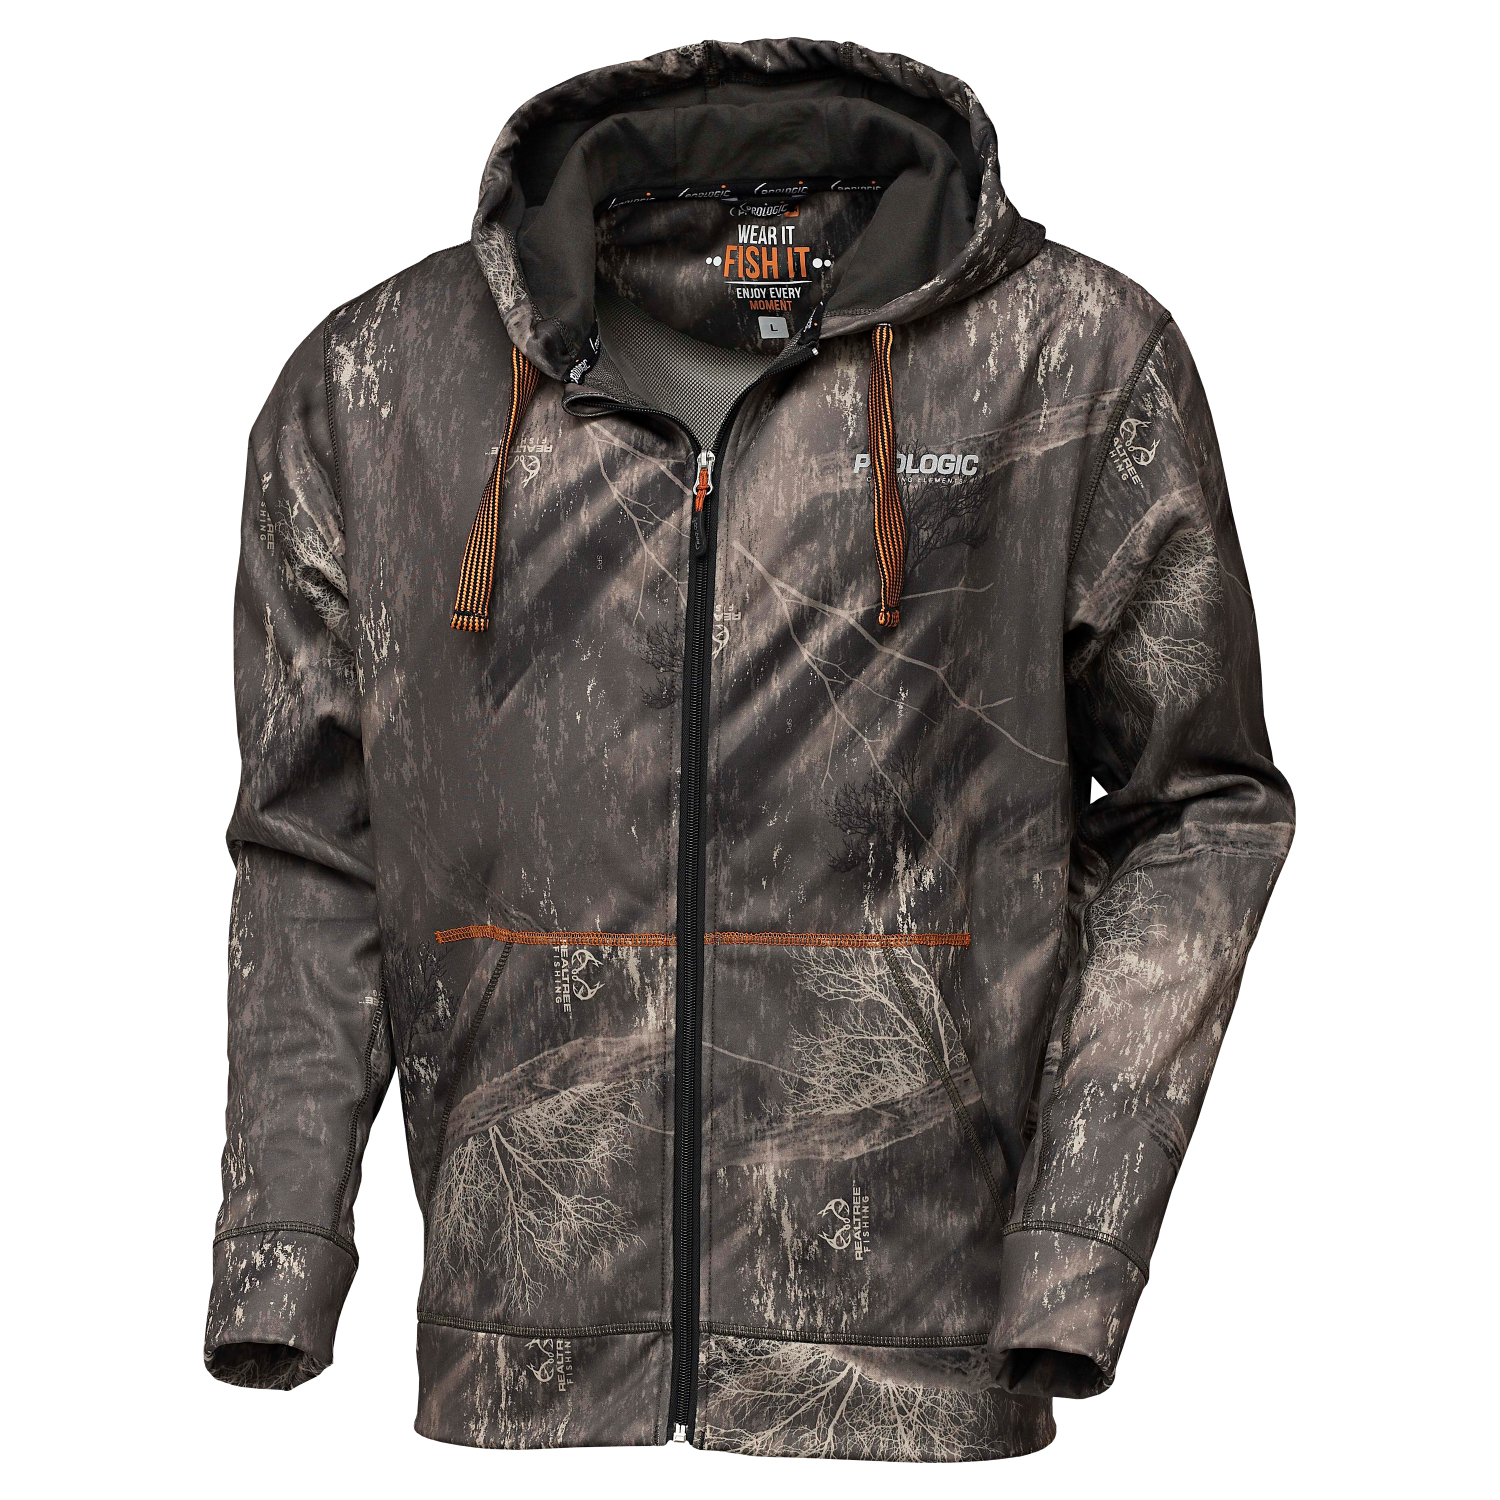 Prologic Mens RealTree Angel Hooded Sweater at low prices